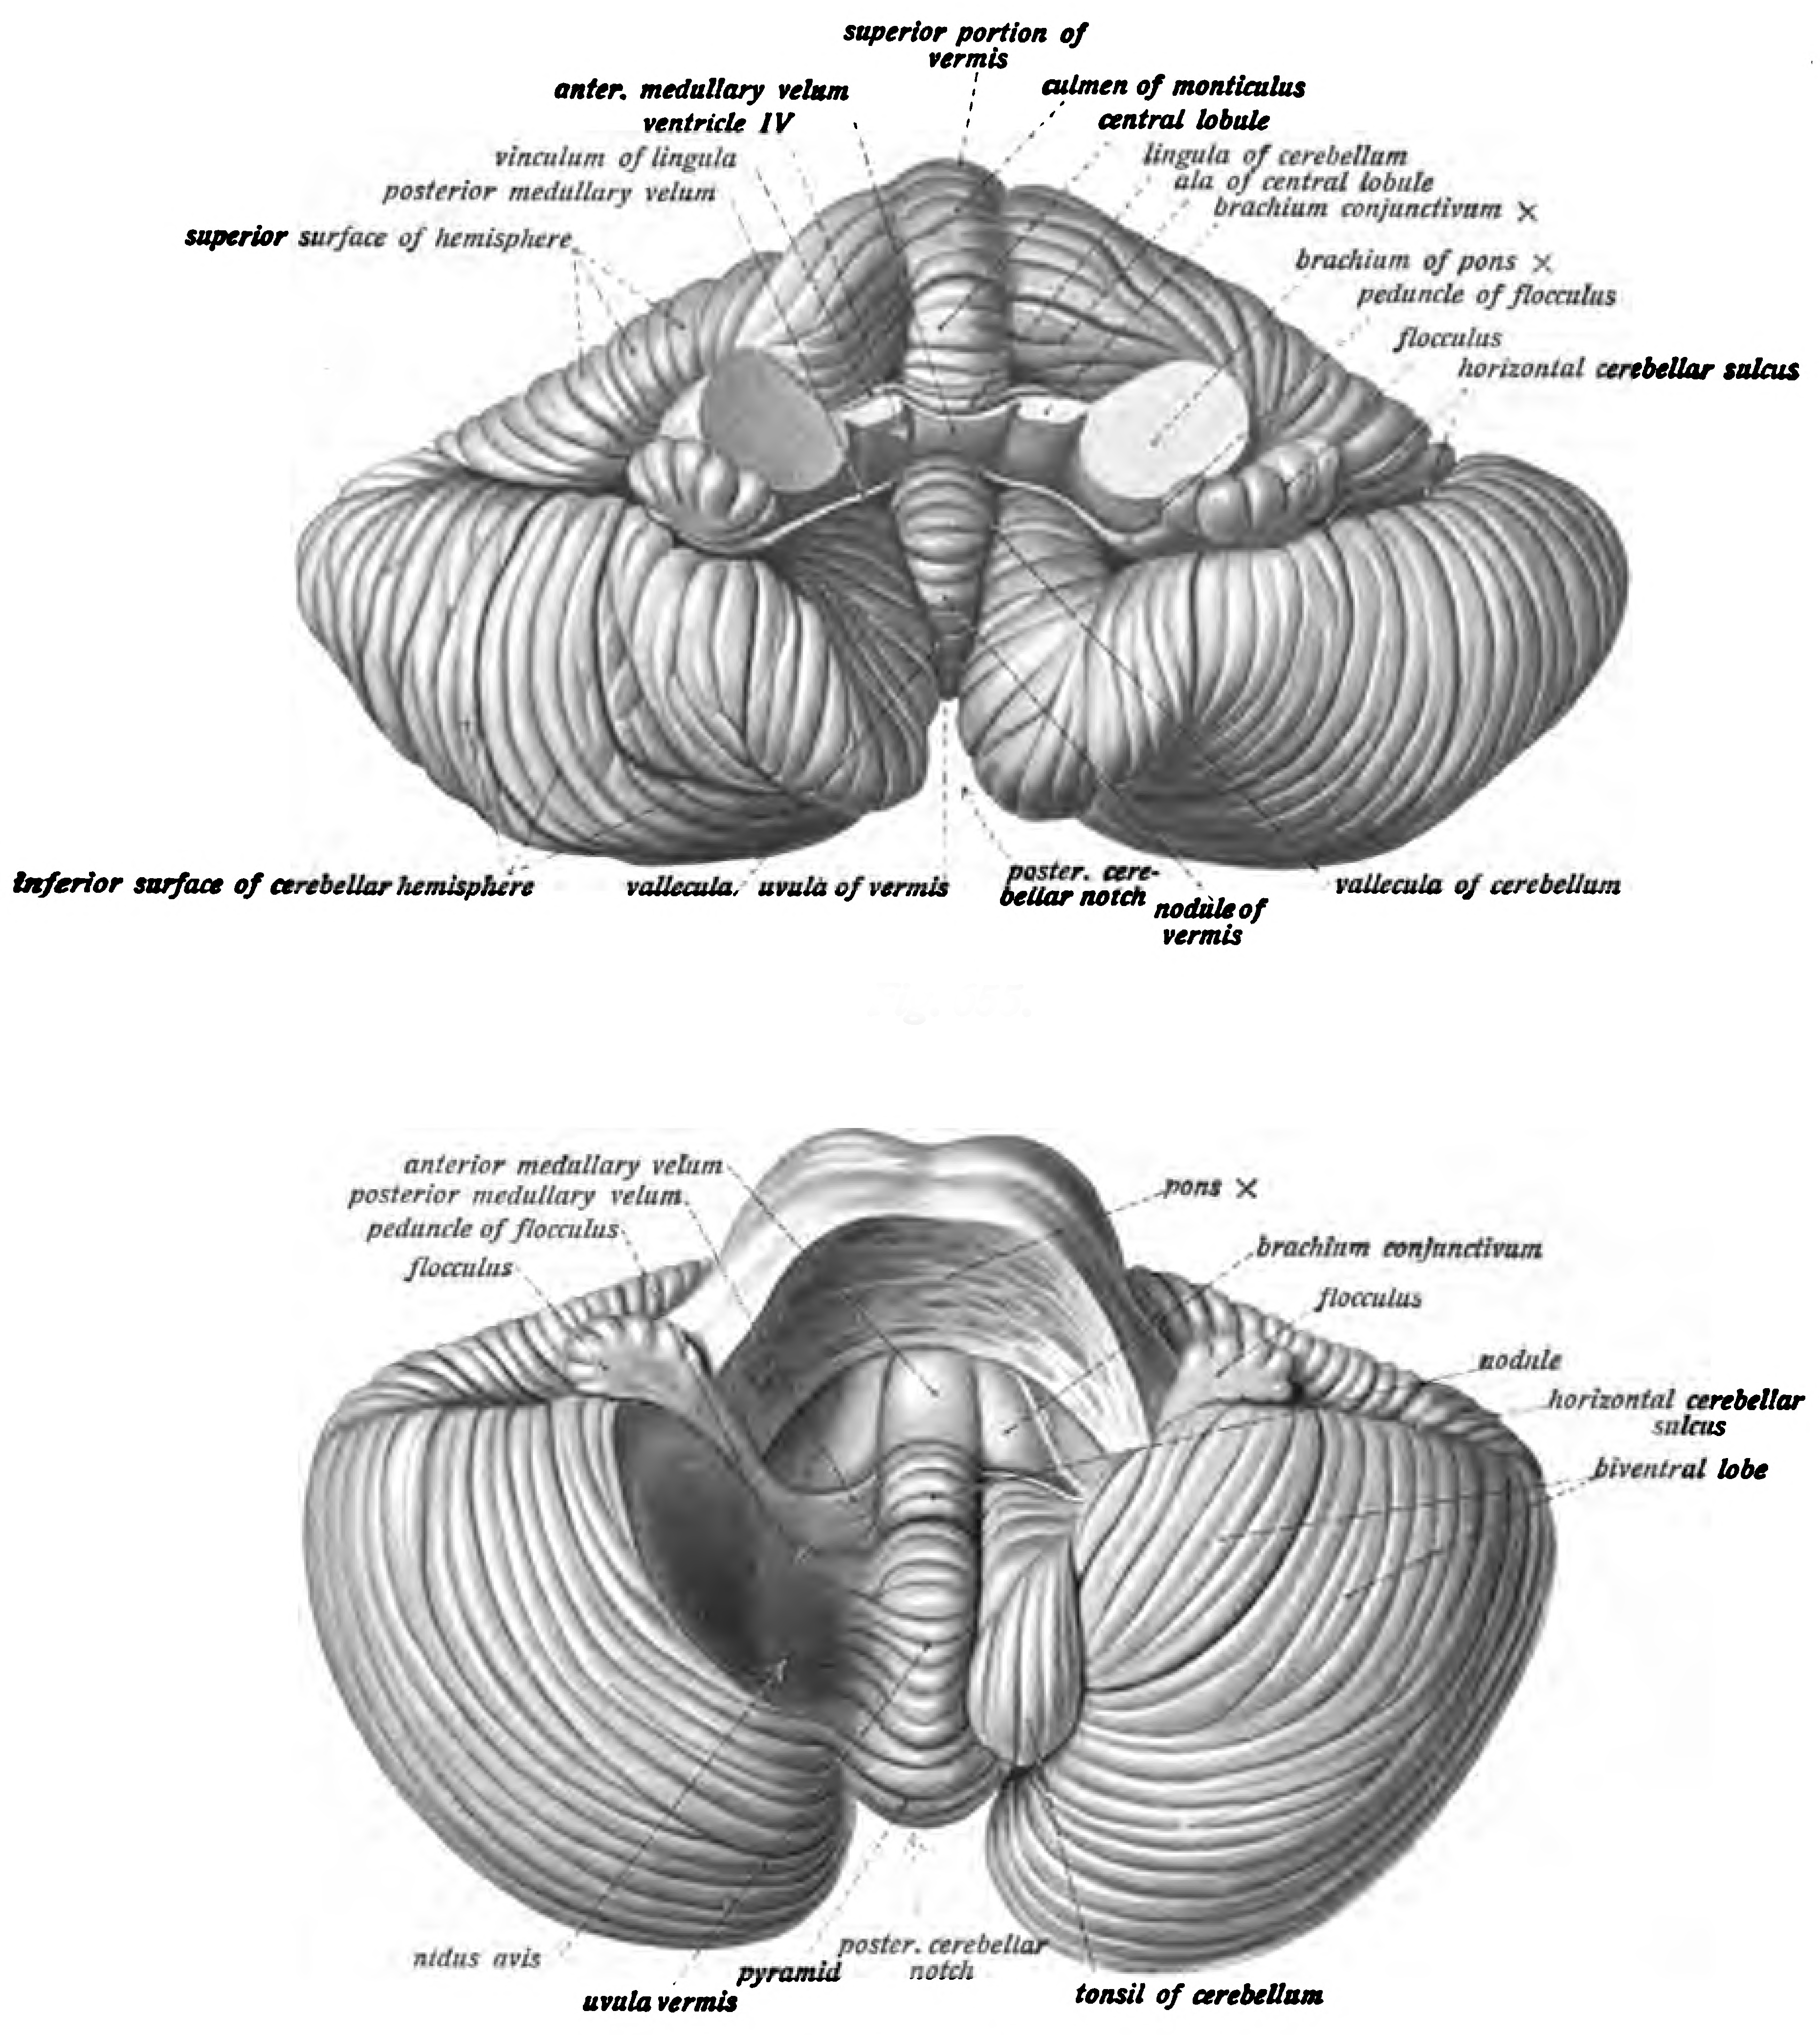 Anterior (top) and inferior (bottom) view of the cerebellum viewed from above and behind (top). Sobotta’s Textbook and Atlas of Human Anatomy 1909